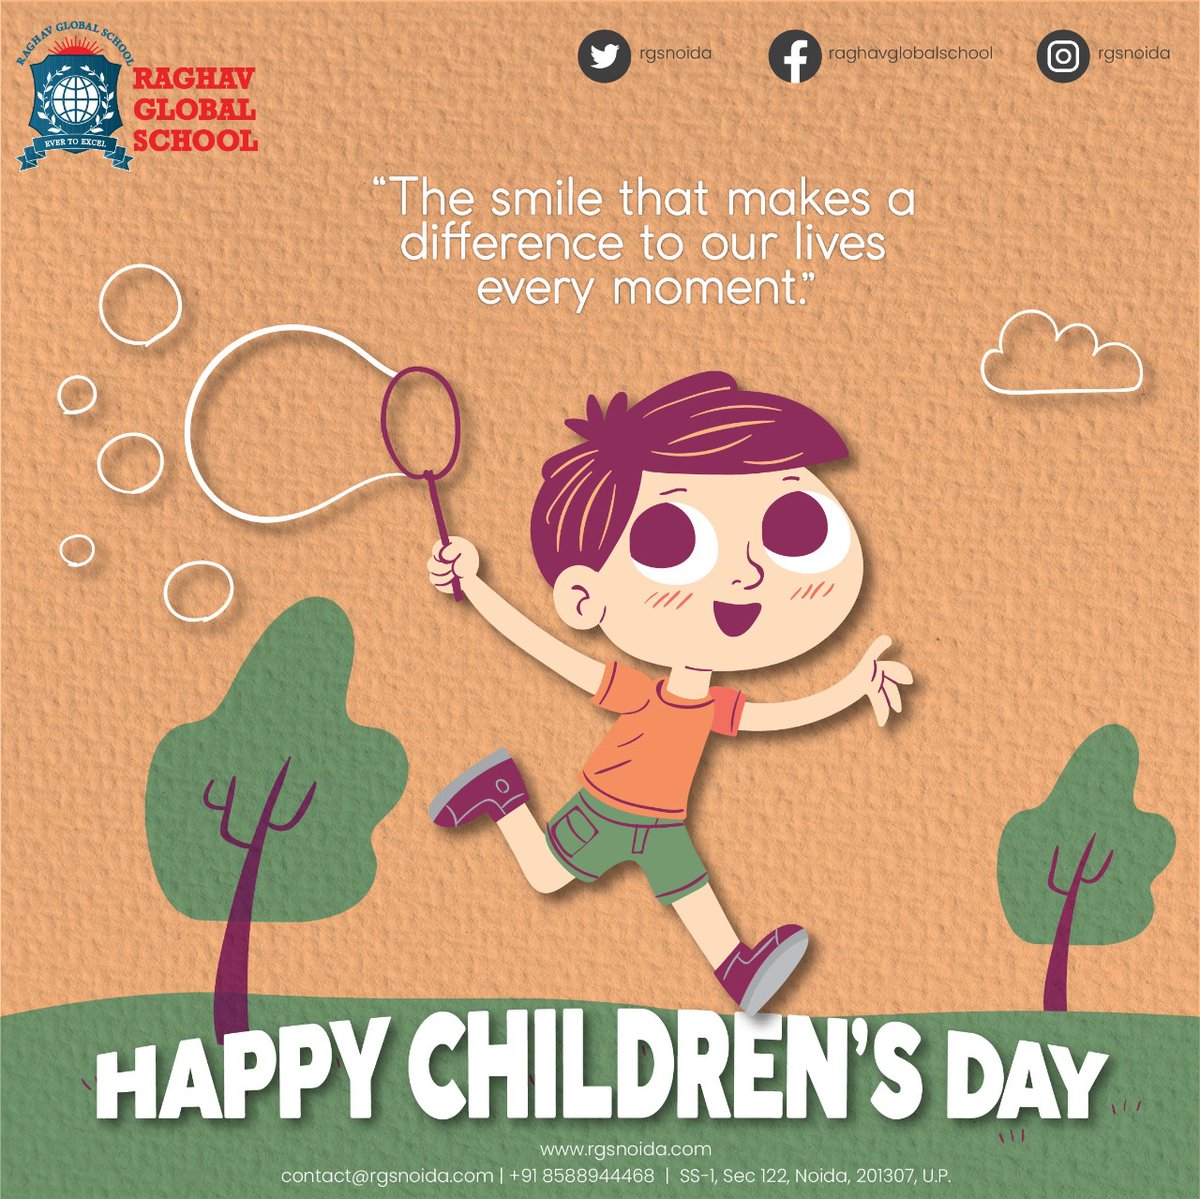 The smile that makes a difference to our lives every moment😃🤗☺️😚🤩🙂🙃

Happy Children's Day🧒🏻☺️👧🏻☺️👦🏻🤗

#ChildrensDay #ChildrensDay2021 #jawaharlalnehrubirthday #children #thechildrenoftheworld #school #RGSNoida #RaghavGlobalSchool